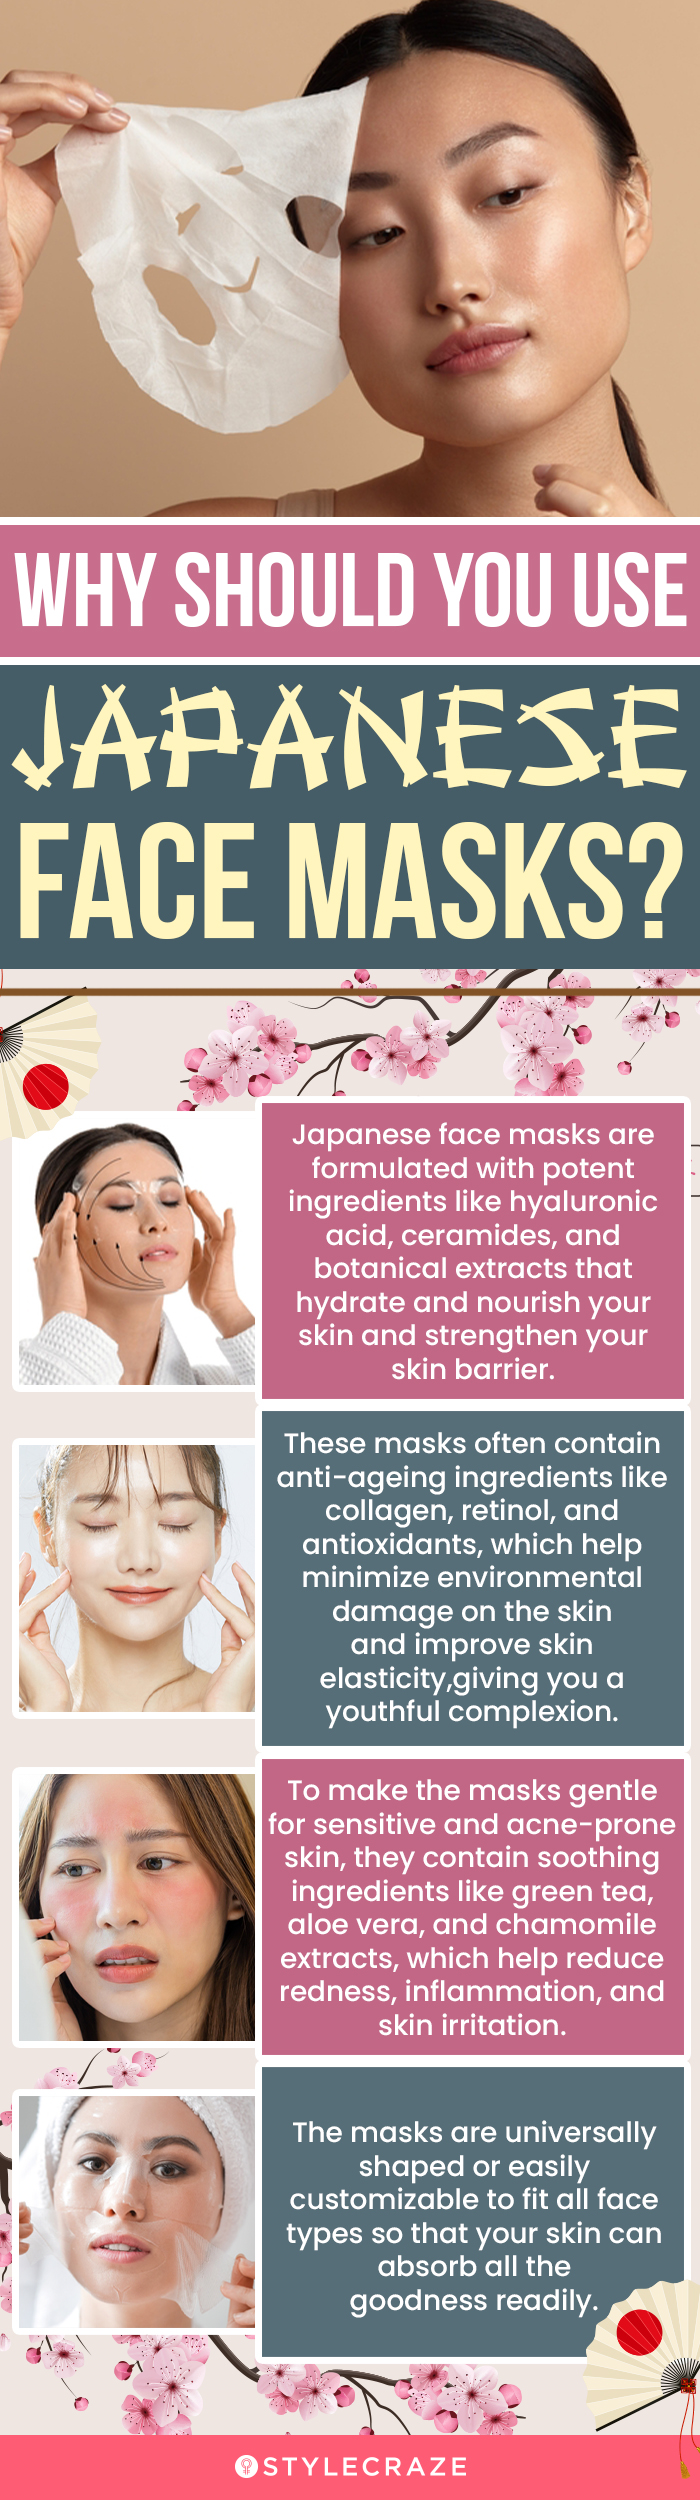 Why Should You Use Japanese Face Masks? (infographic)